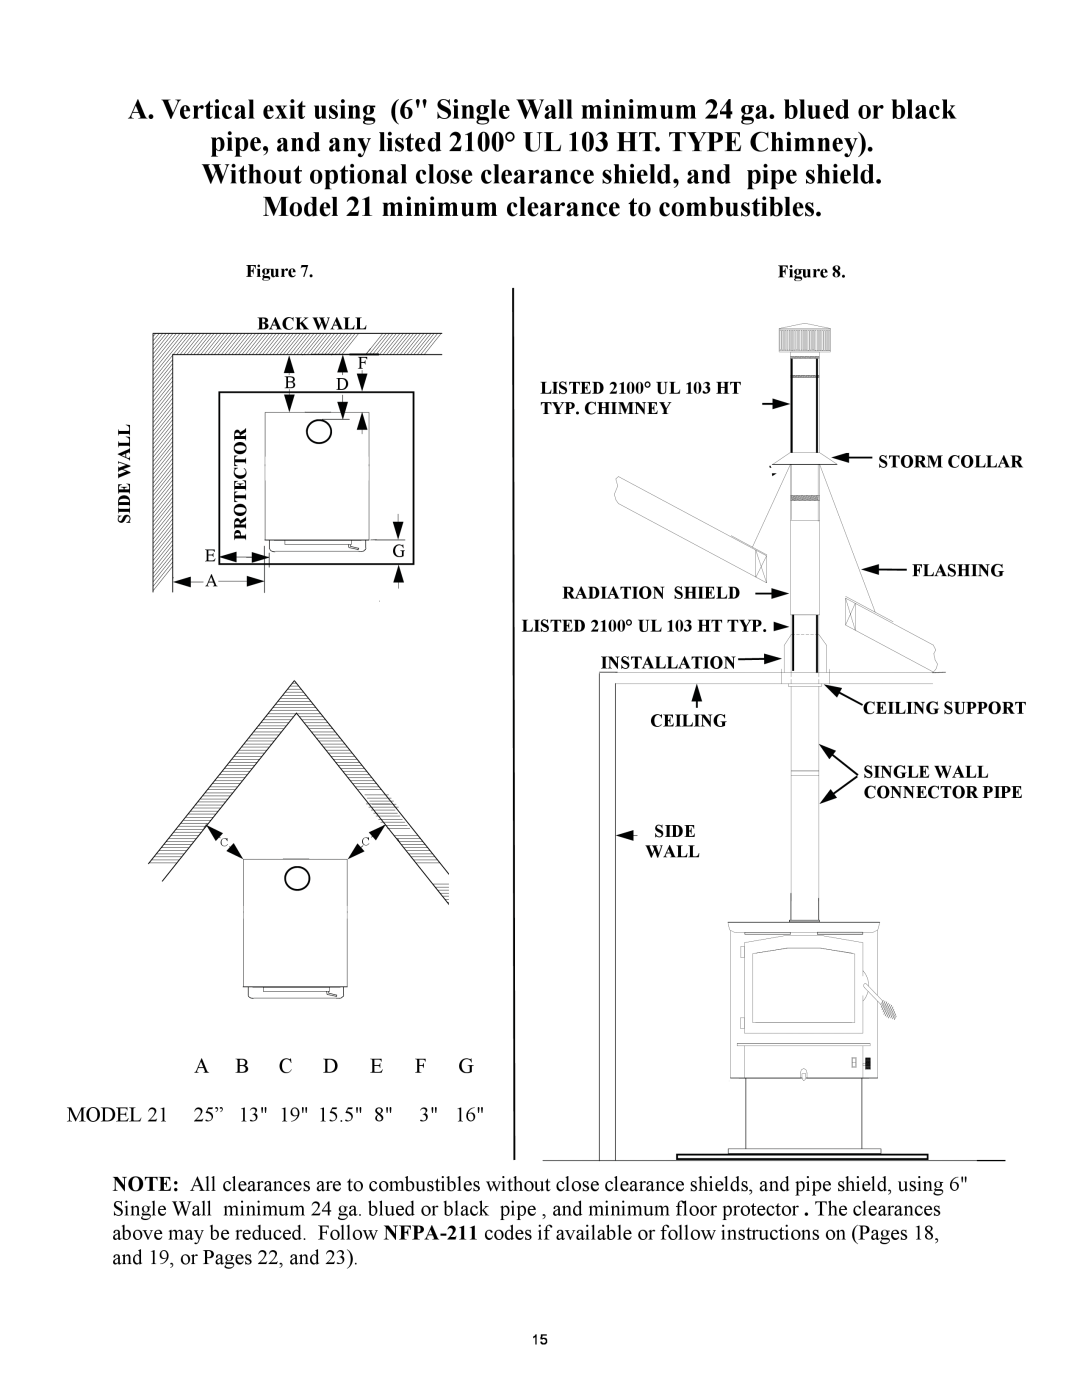 New Buck Corporation installation instructions Model 21 minimum clearance to combustibles 